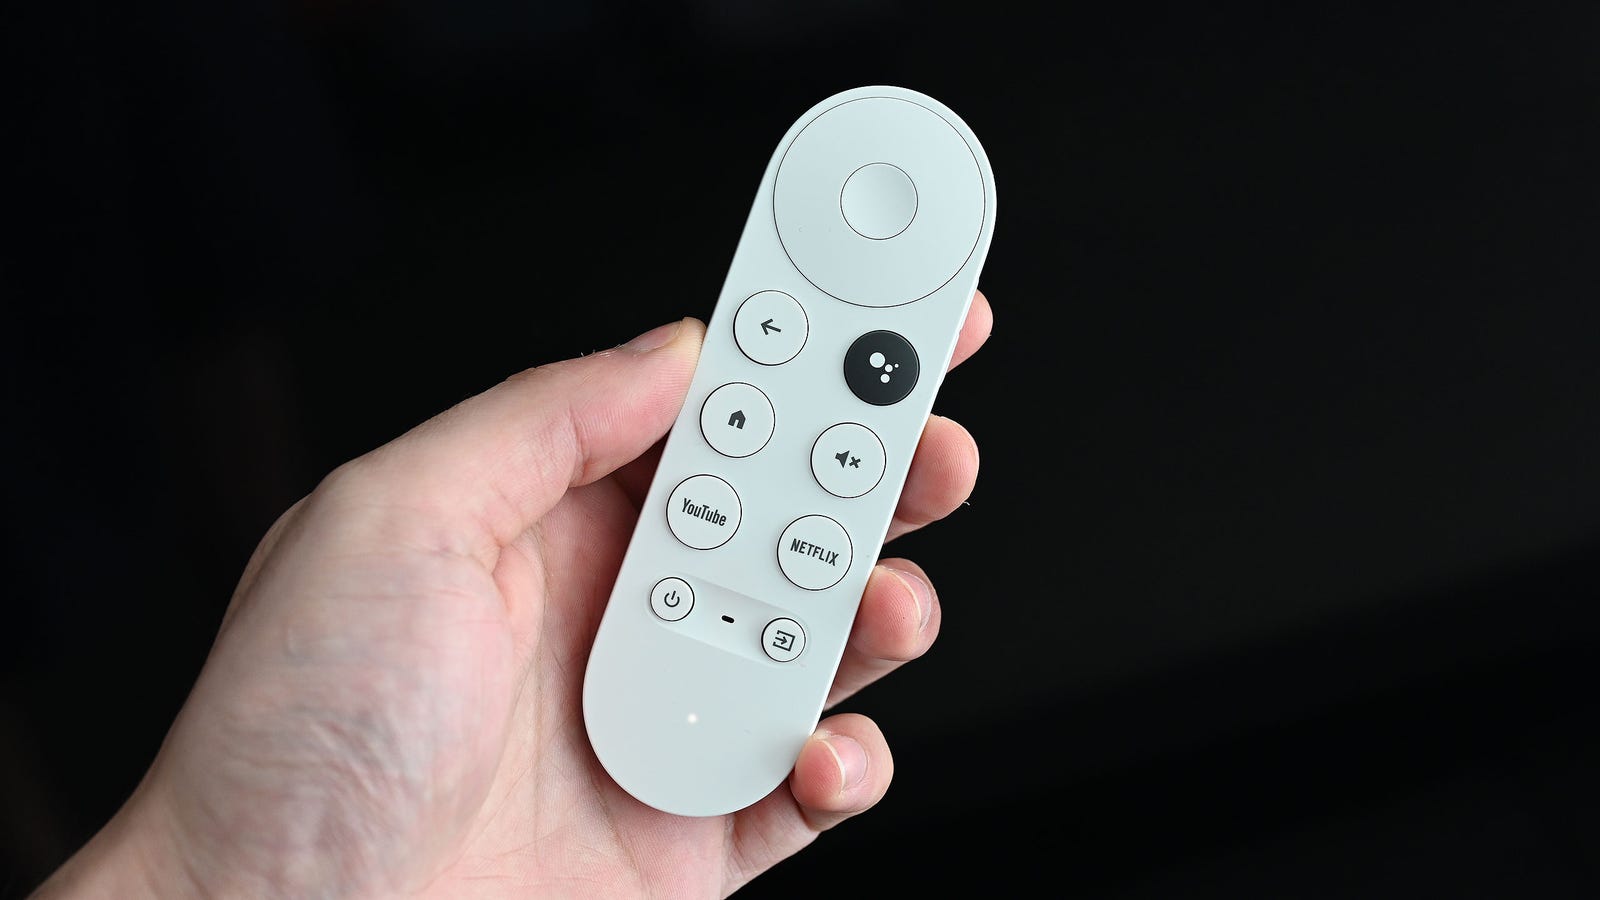 google tv remote buttons